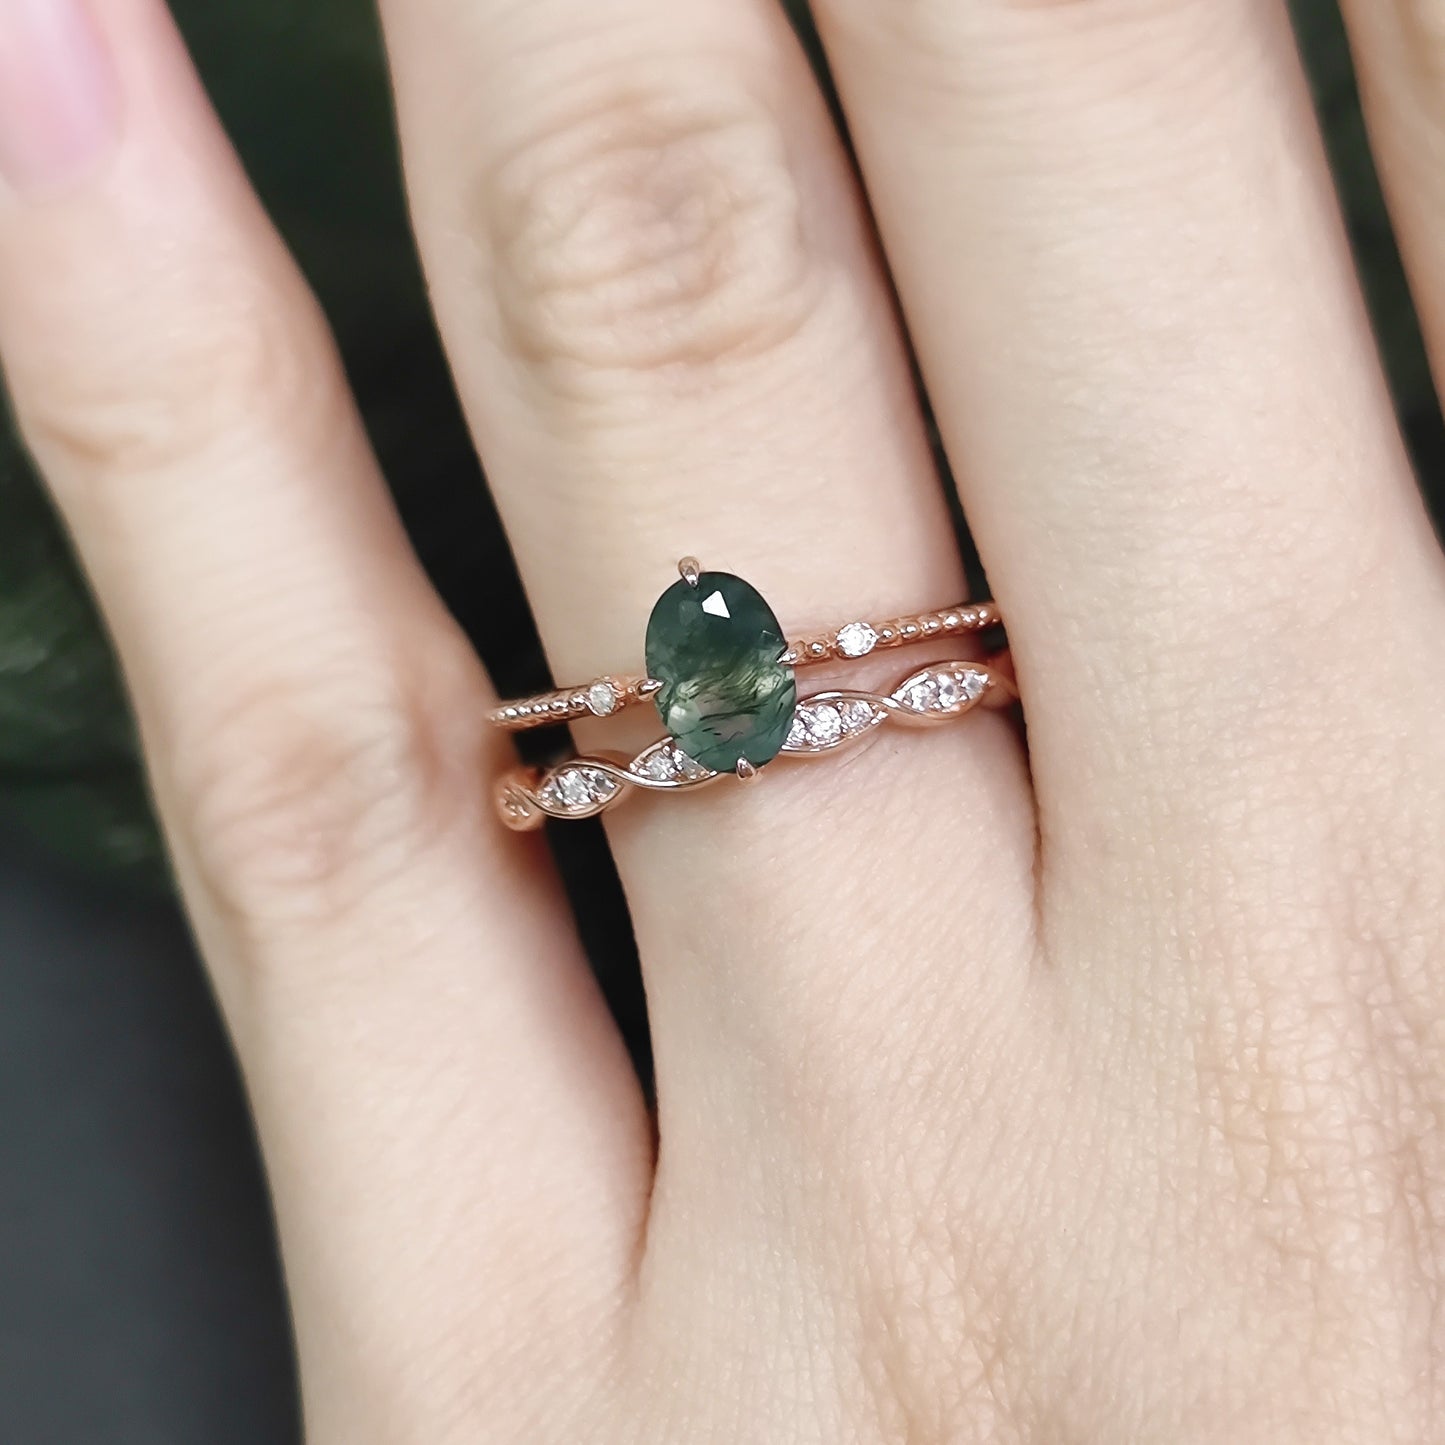 Oval Moss Agate Engagement Ring Sets 2pcs